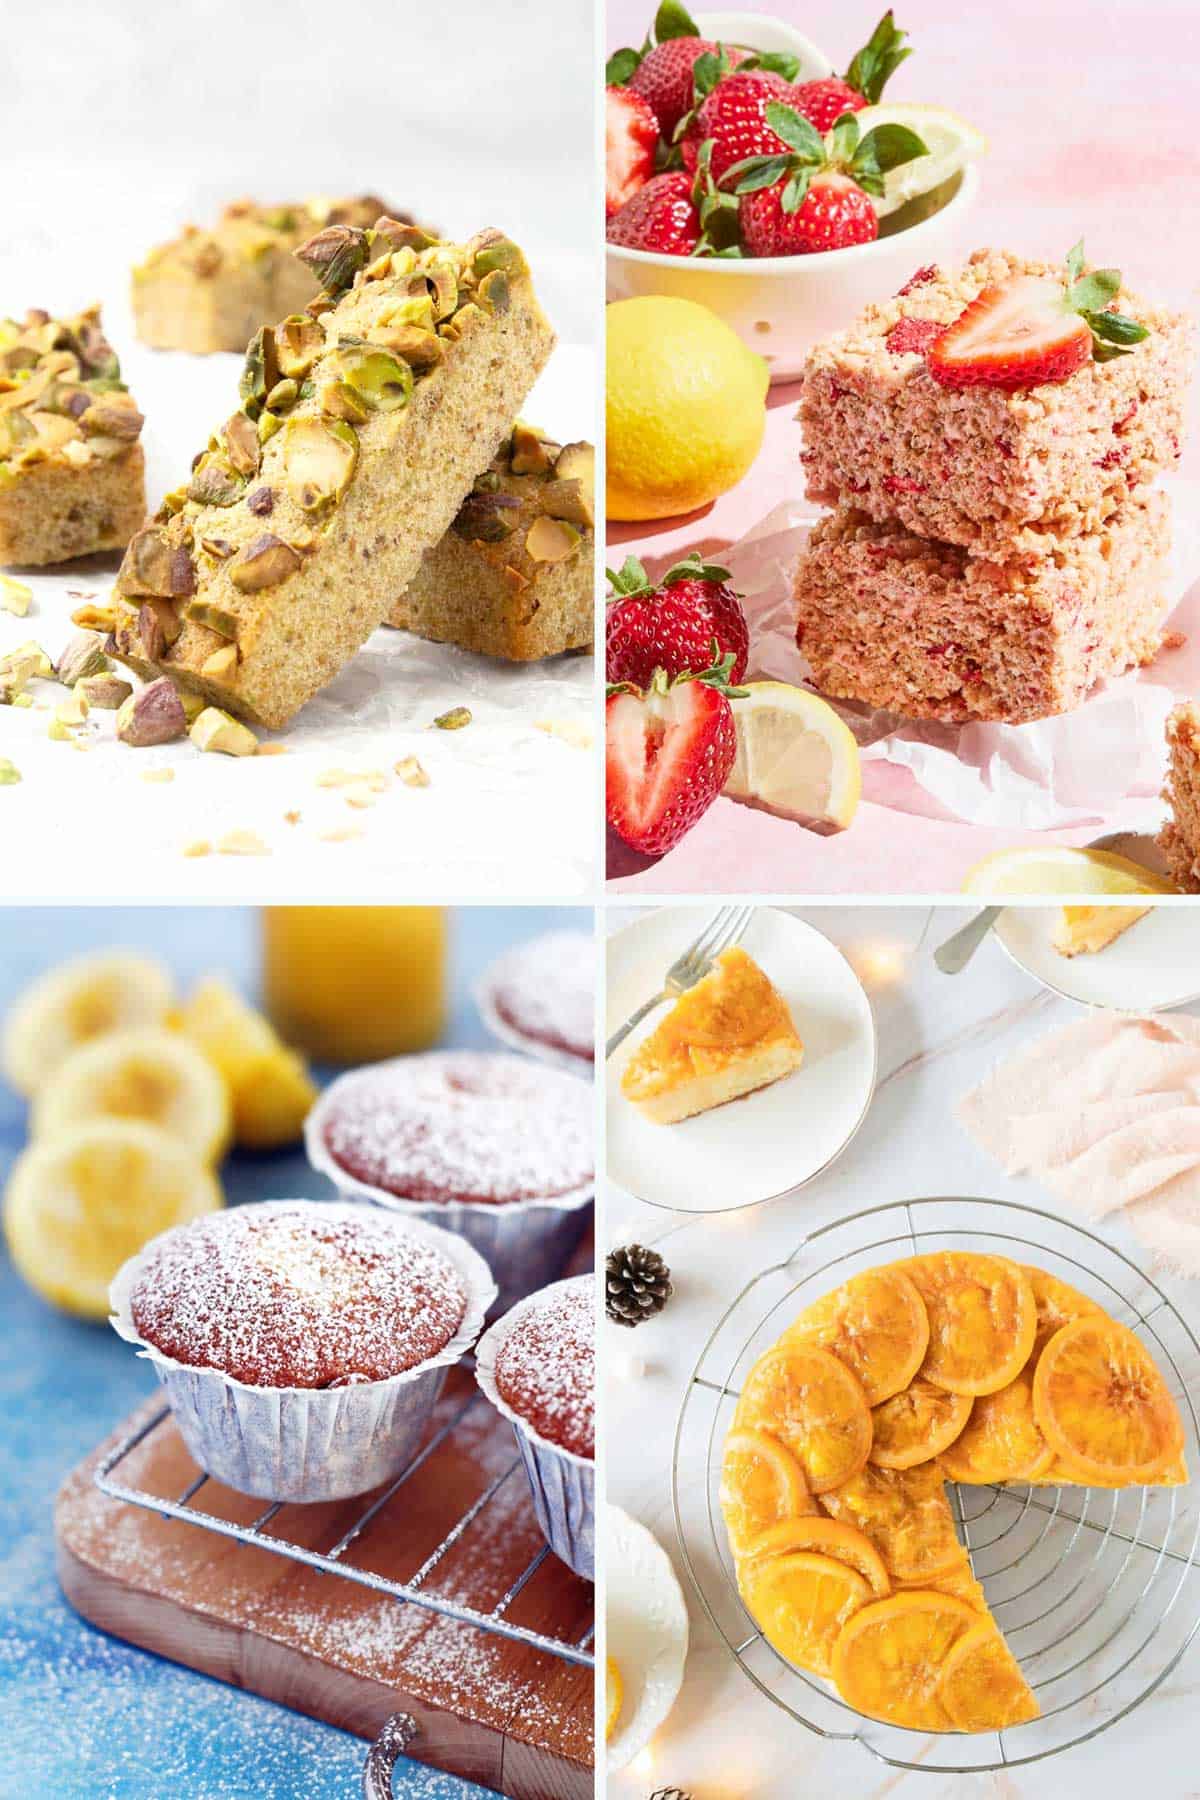 An assortment of baked goods including pistachio bars, strawberry rice cereal bars, powdered sugar muffins, and an orange-glazed cake.